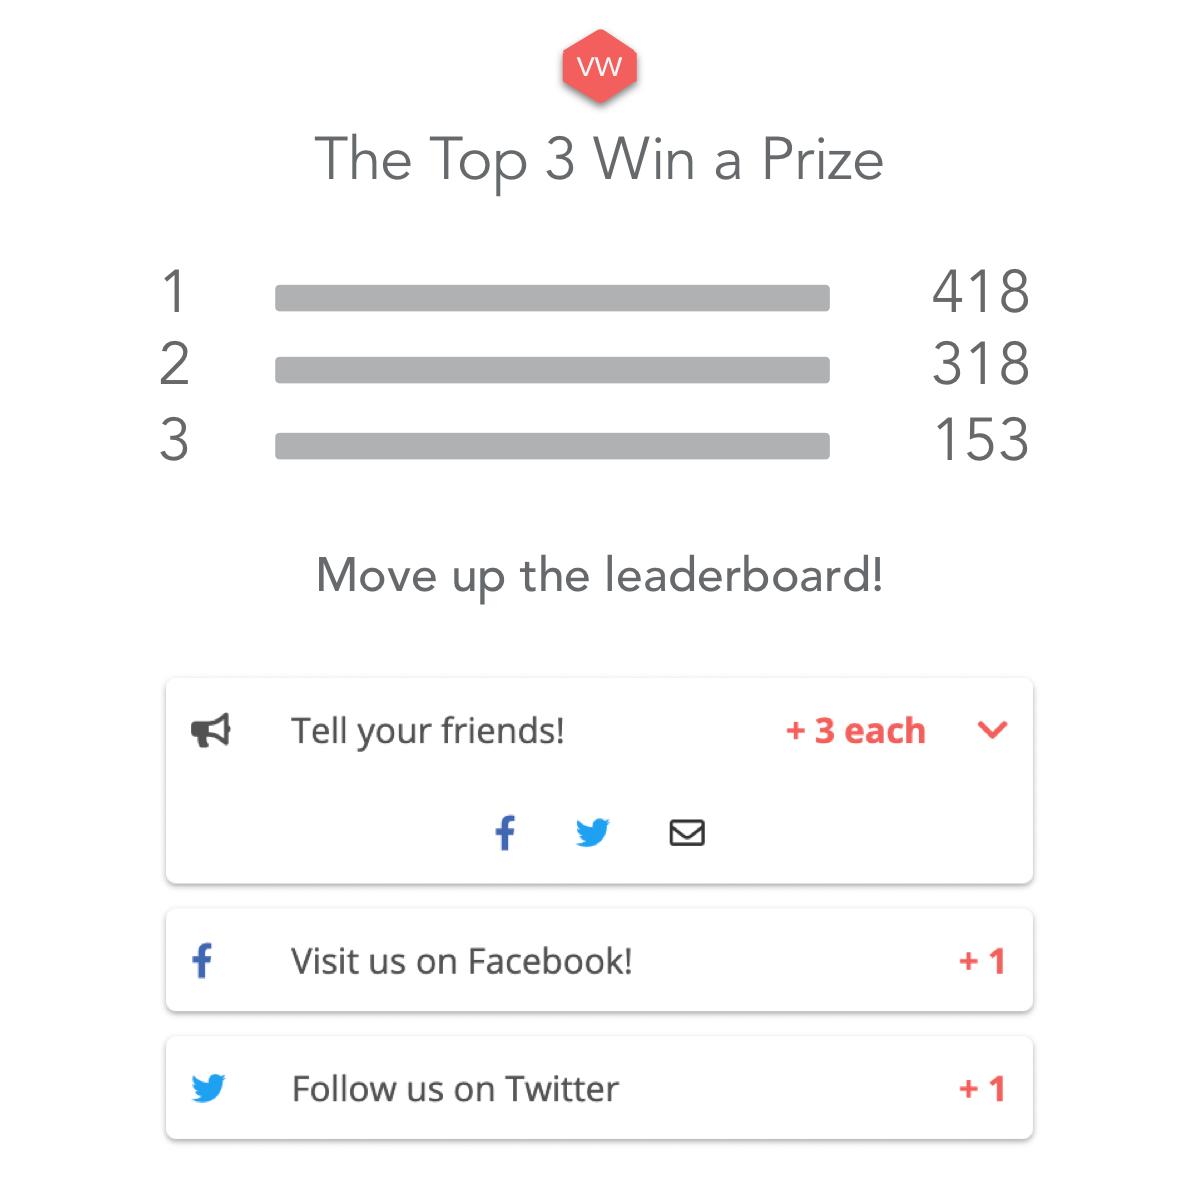 Top three win a prize and move up